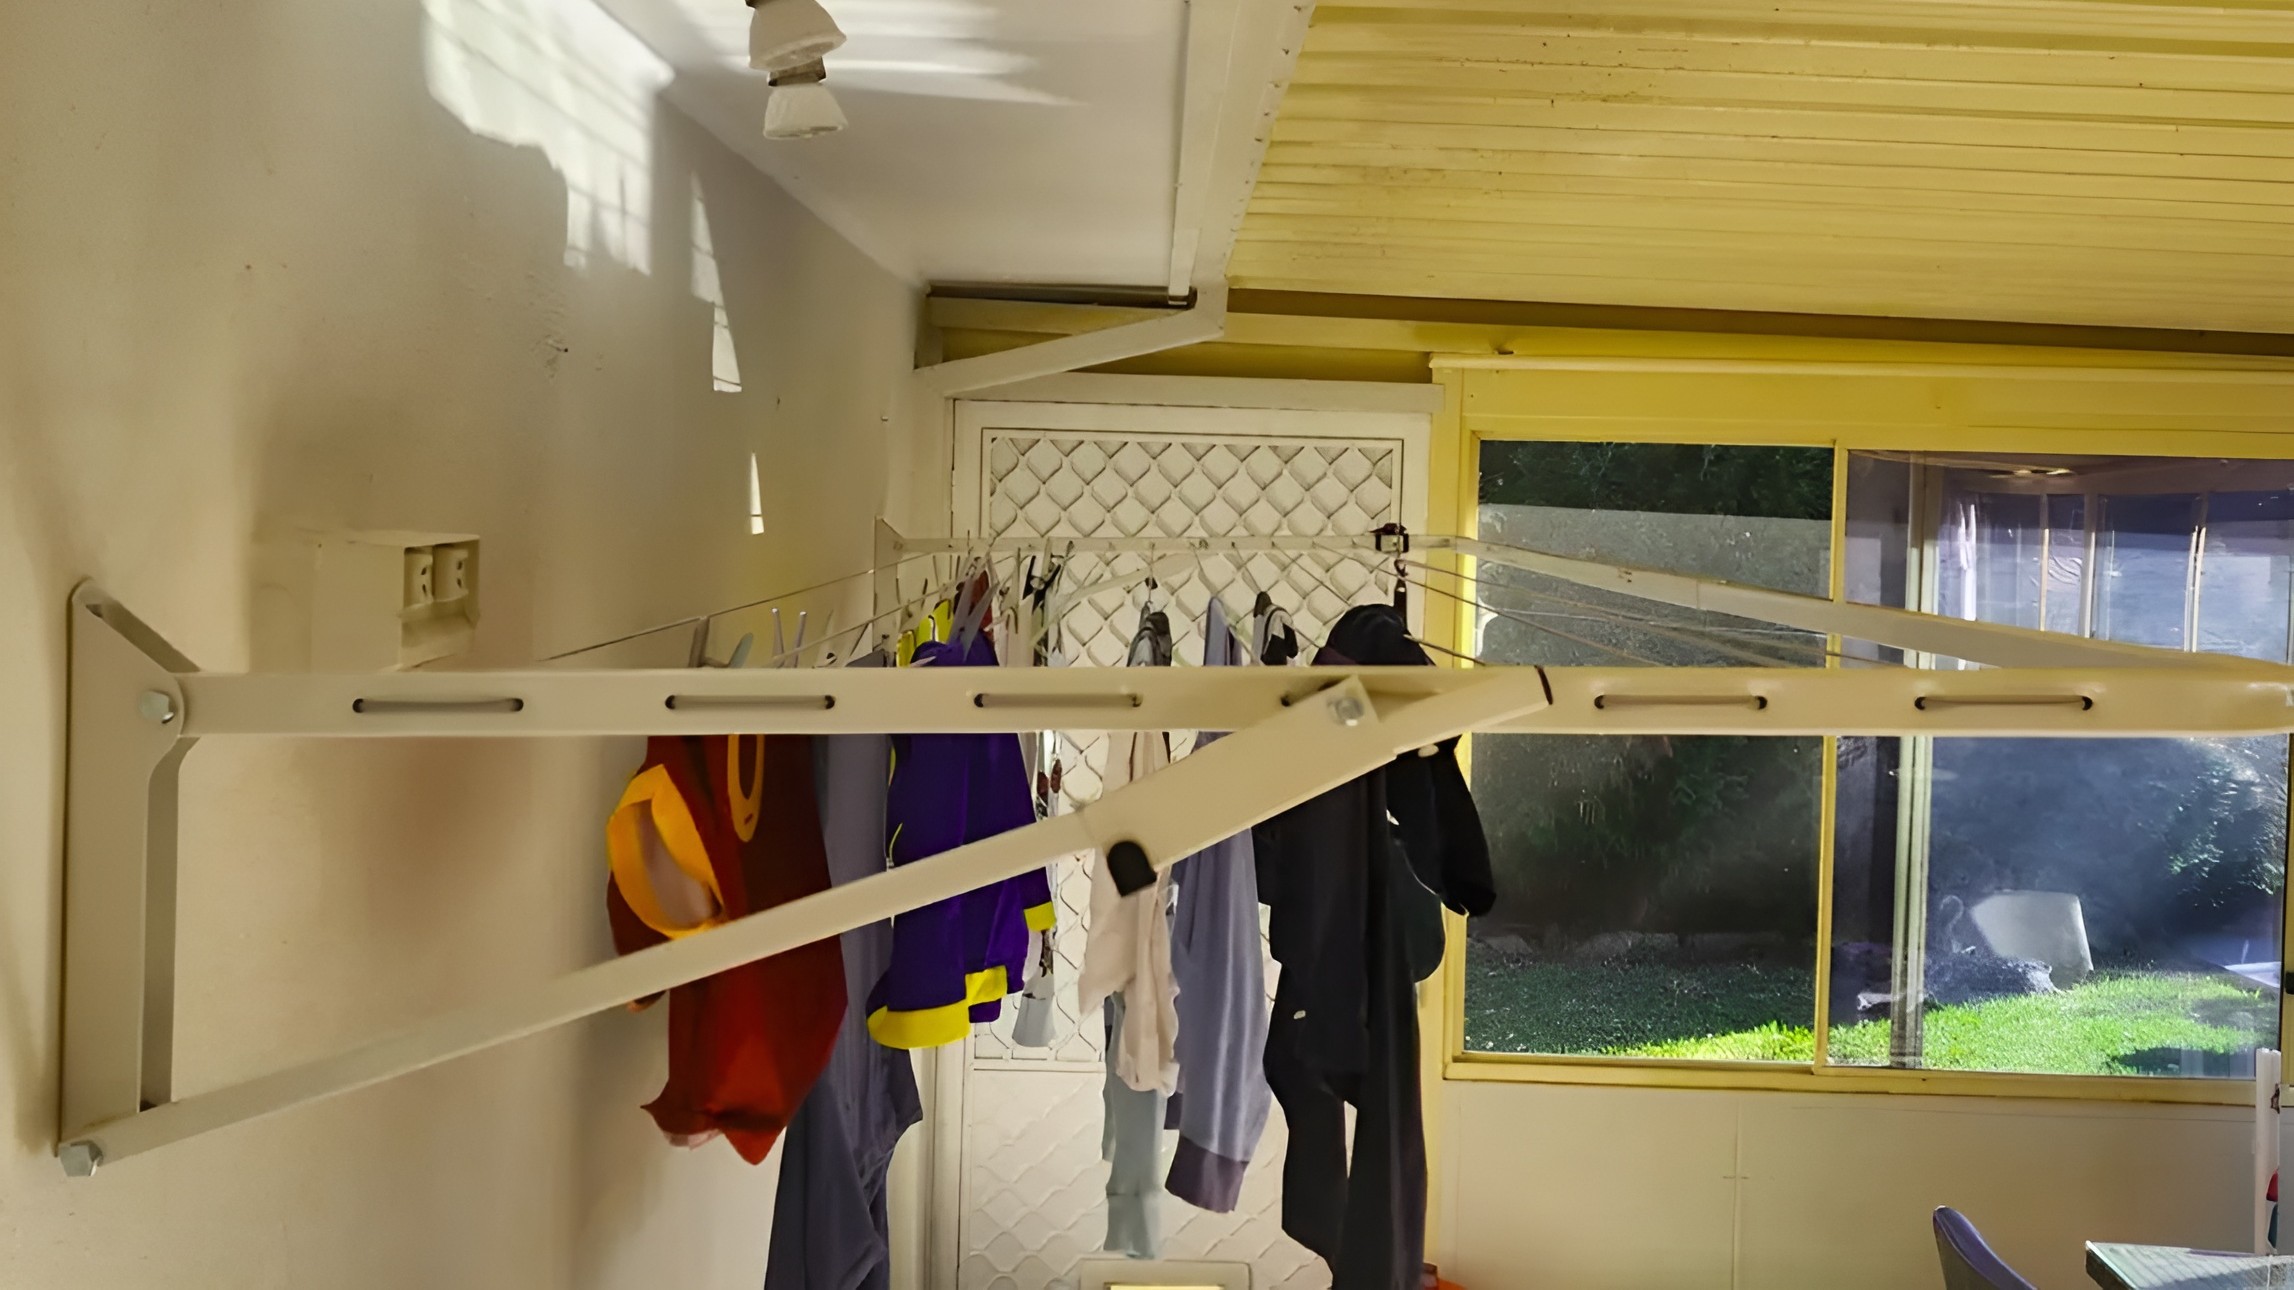 Heavy Duty Fold Down Clothesline Compact Designs for Single or Couple Households